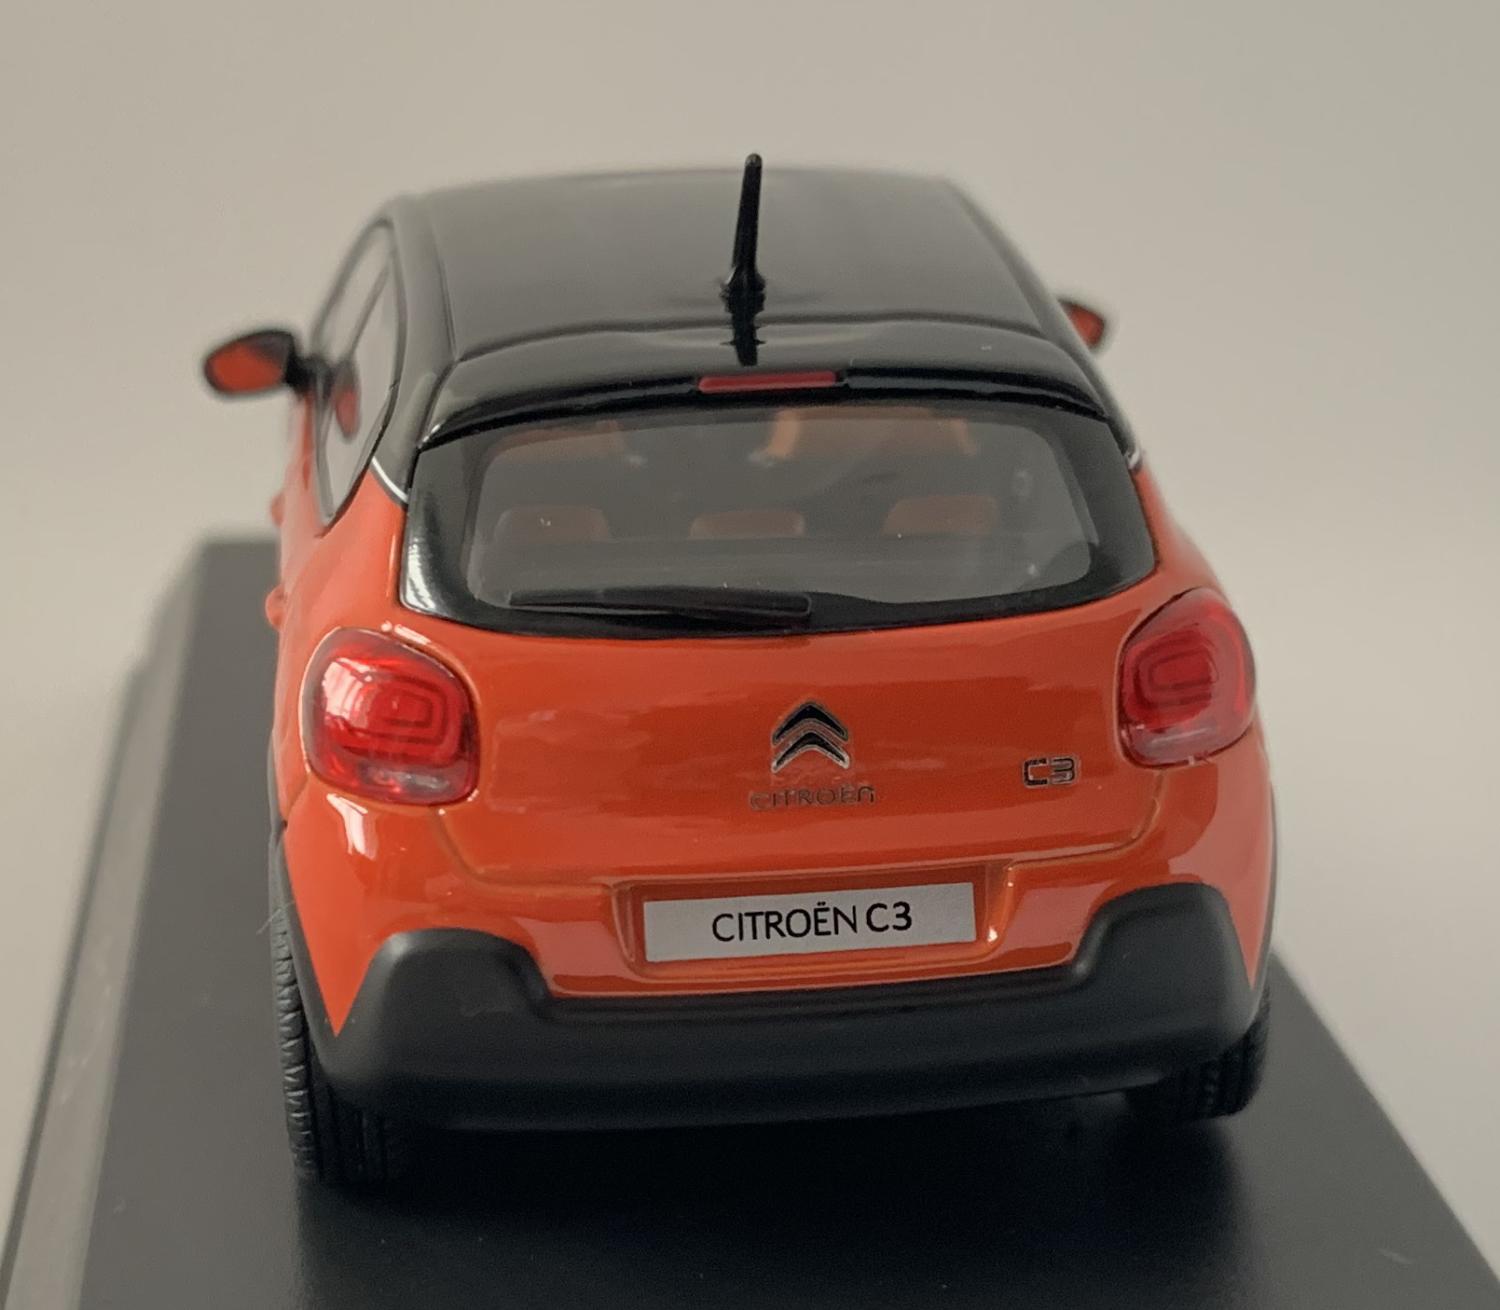 An excellent reproduction of the Citroen C3 with detail throughout, all authentically recreated. Model is mounted on a removable plinth with a removable hard plastic cover